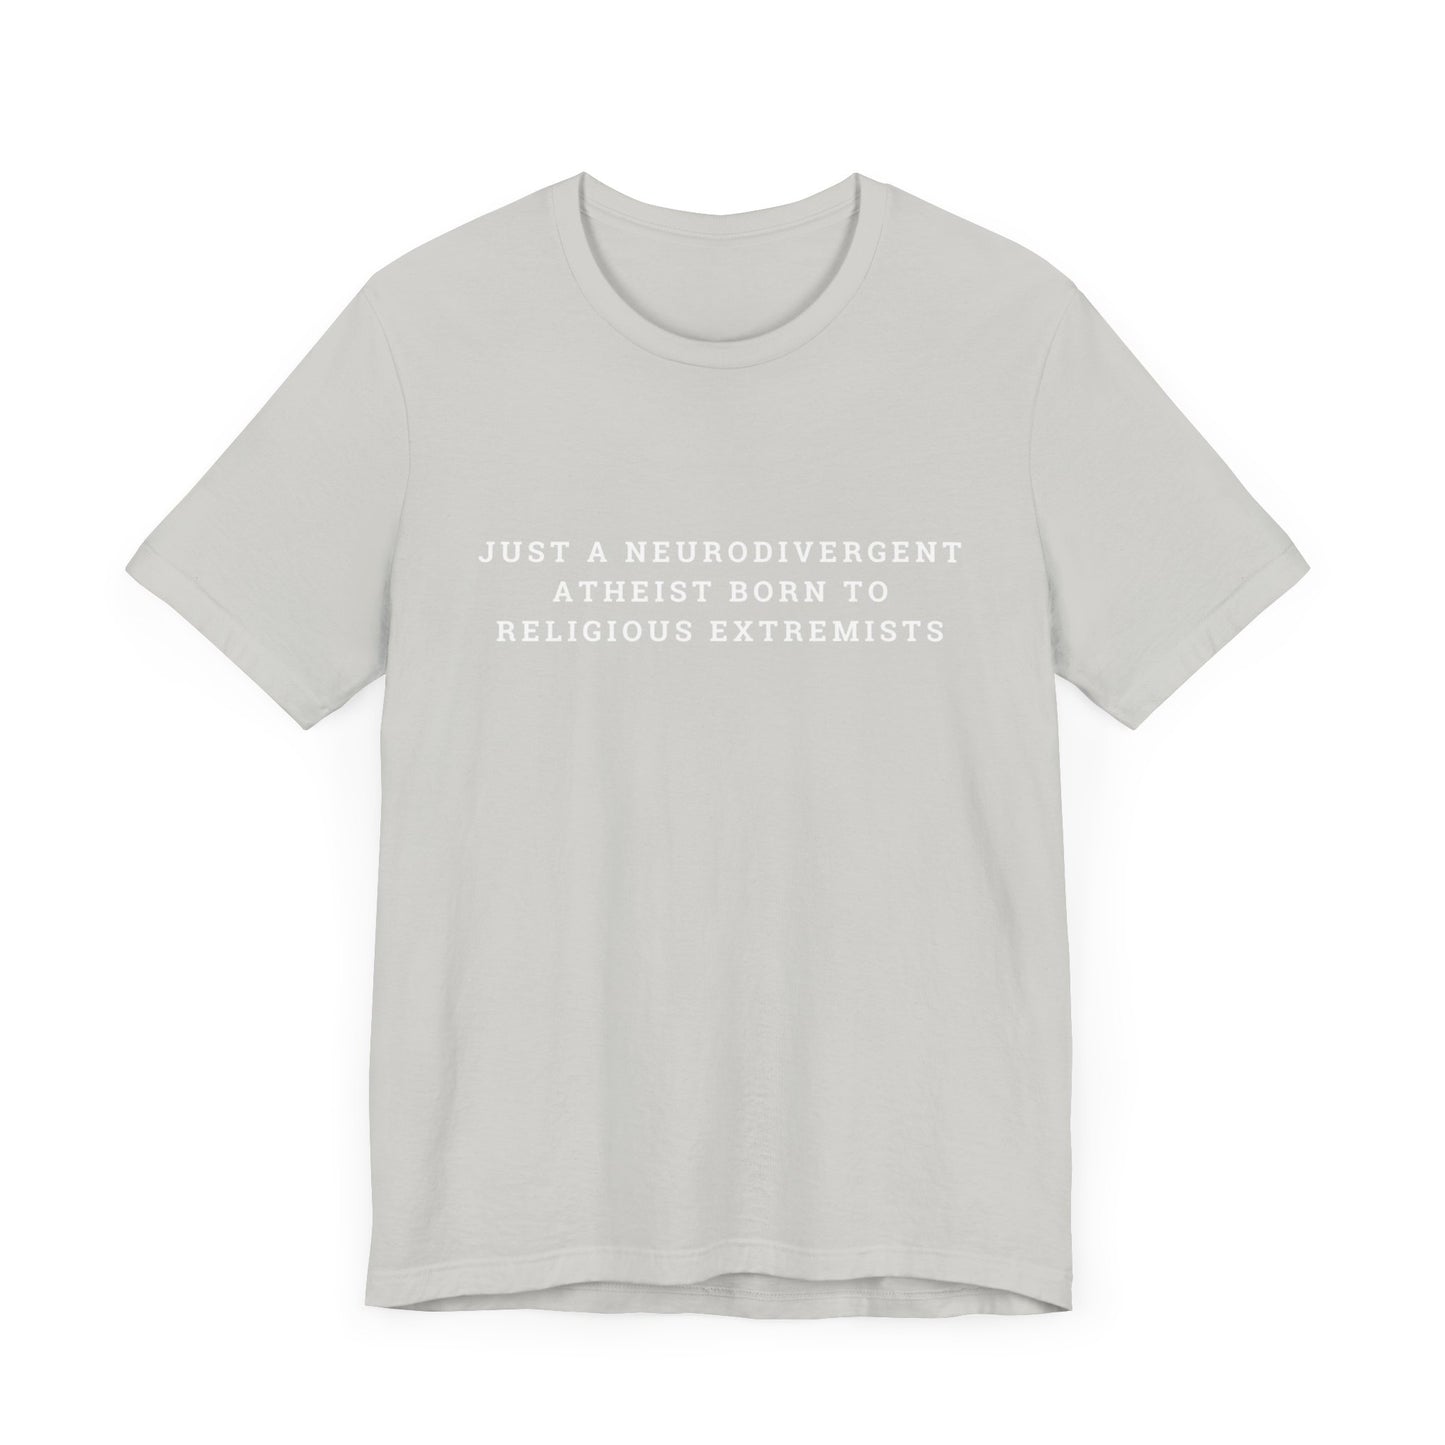 Just A Neurodivergent Atheist Born to Religious Extremists Unisex Jersey Short Sleeve Tee